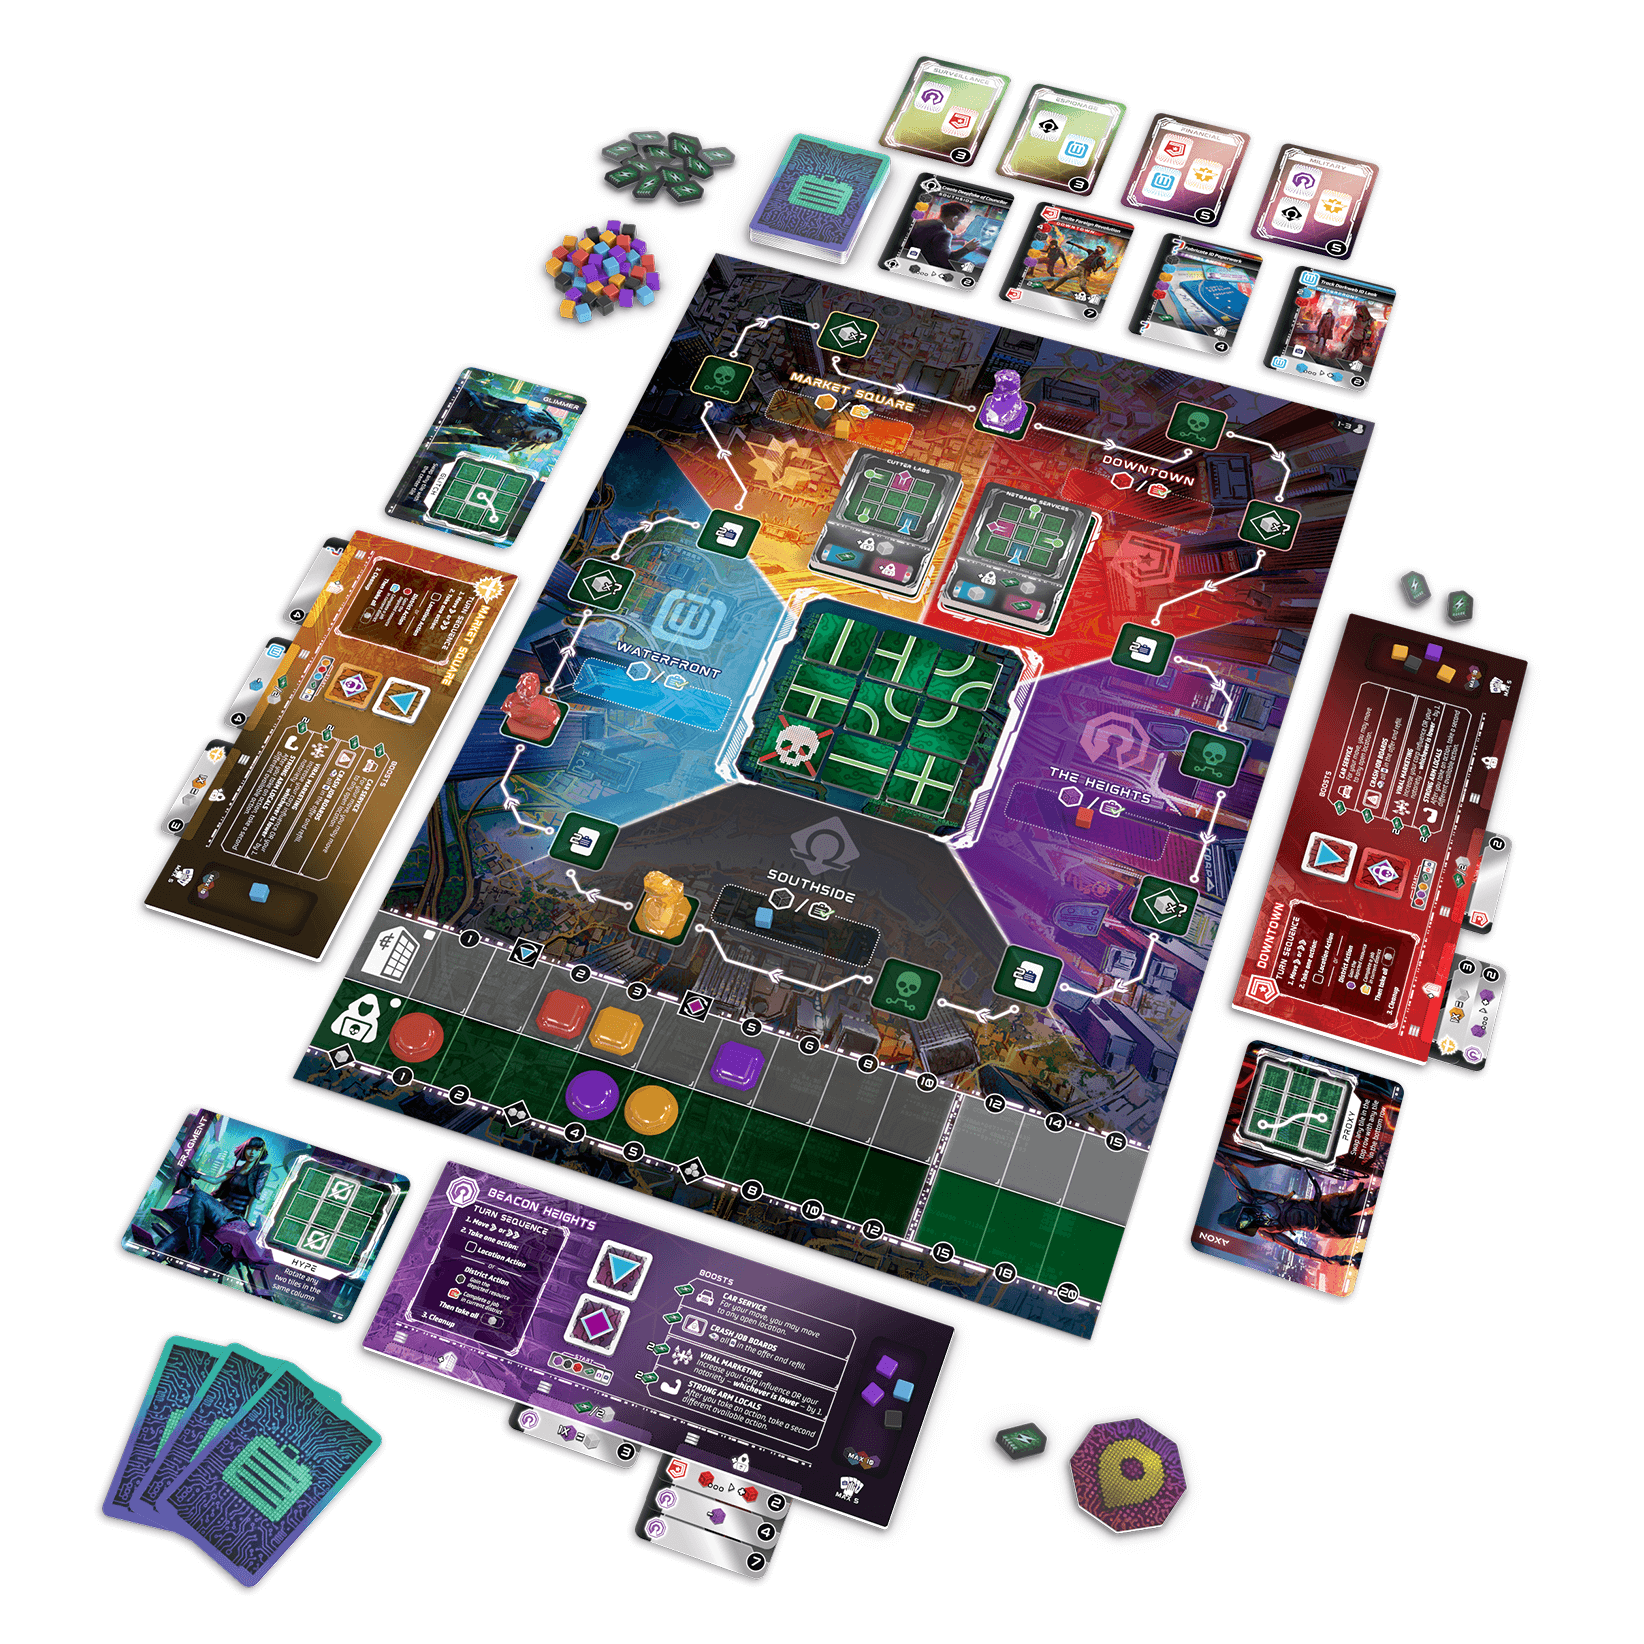 Metrorunner board game board with a game in play, showing player boards, cards, figures, and tokens 